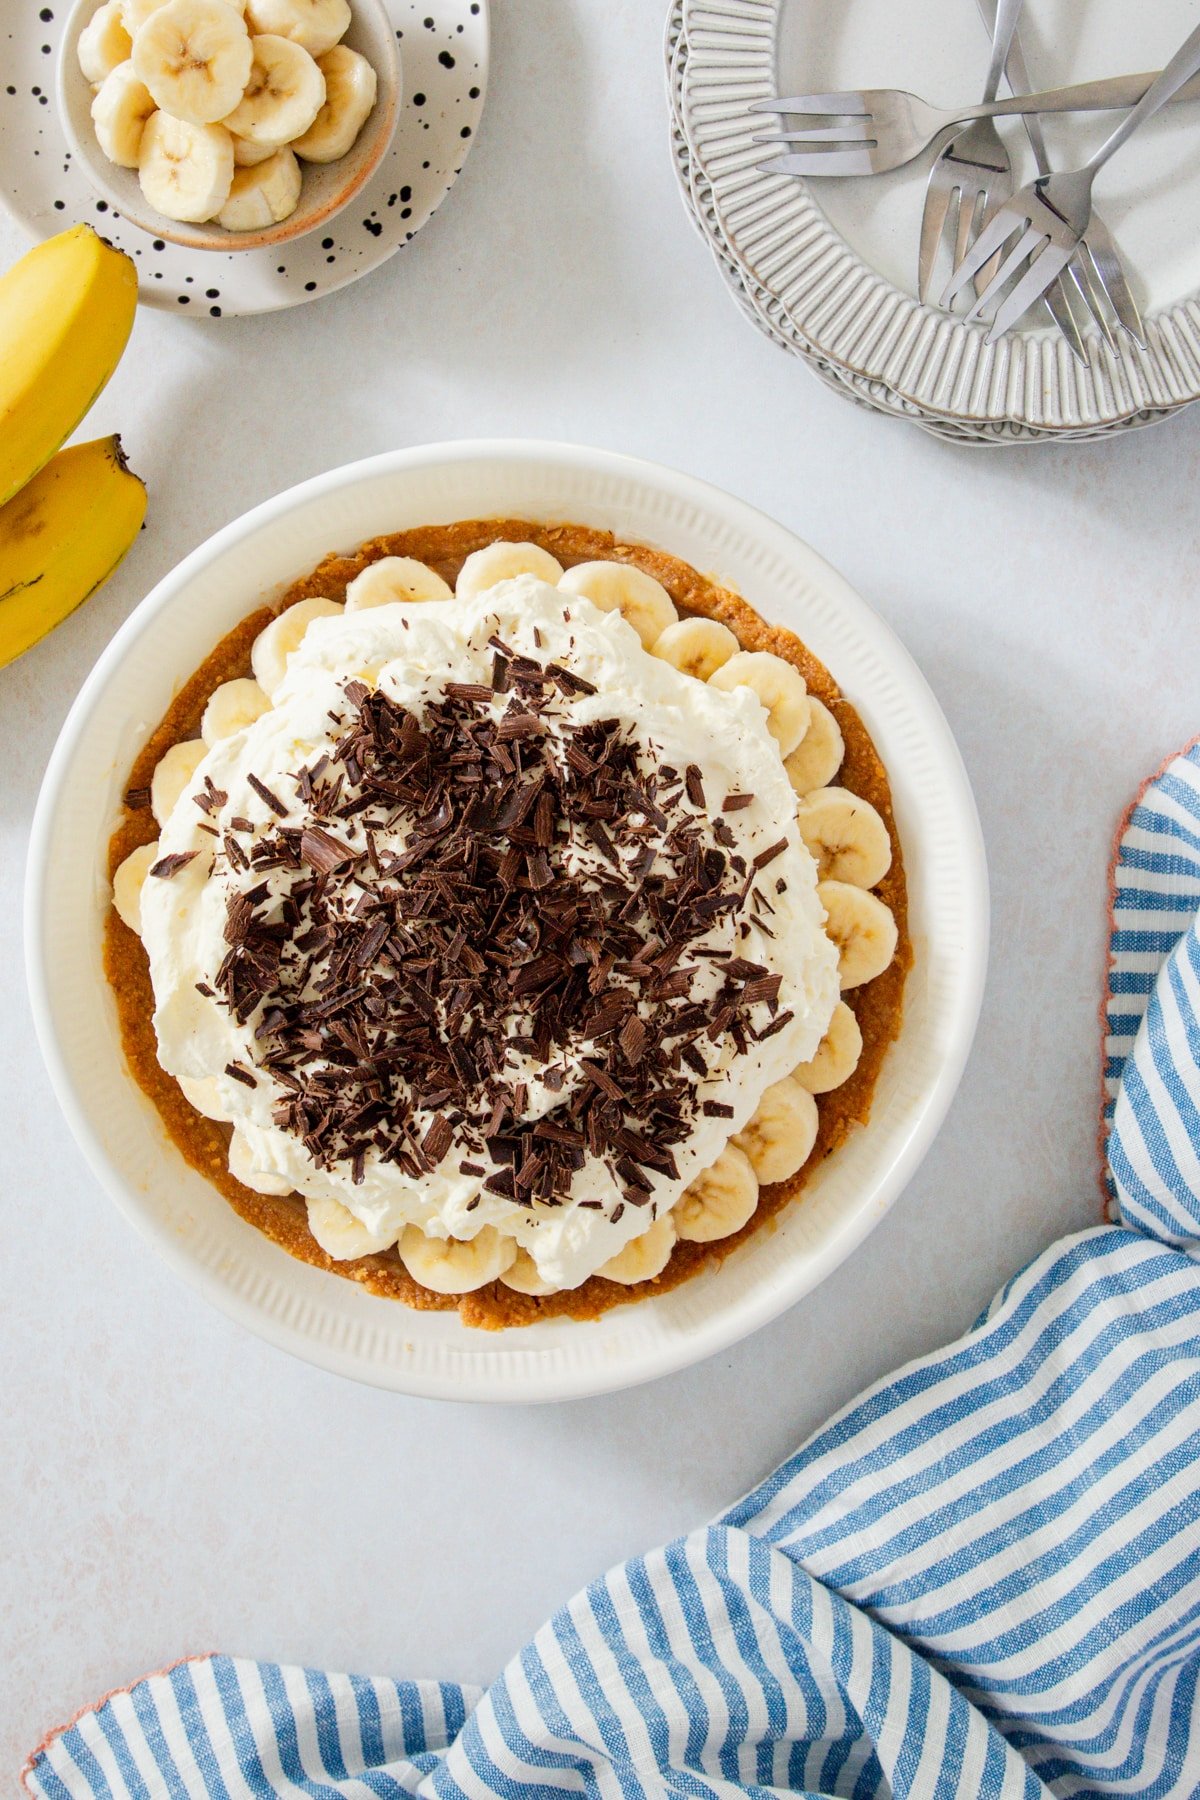 a whole banoffee pie on a table, with slices of banana and plates.